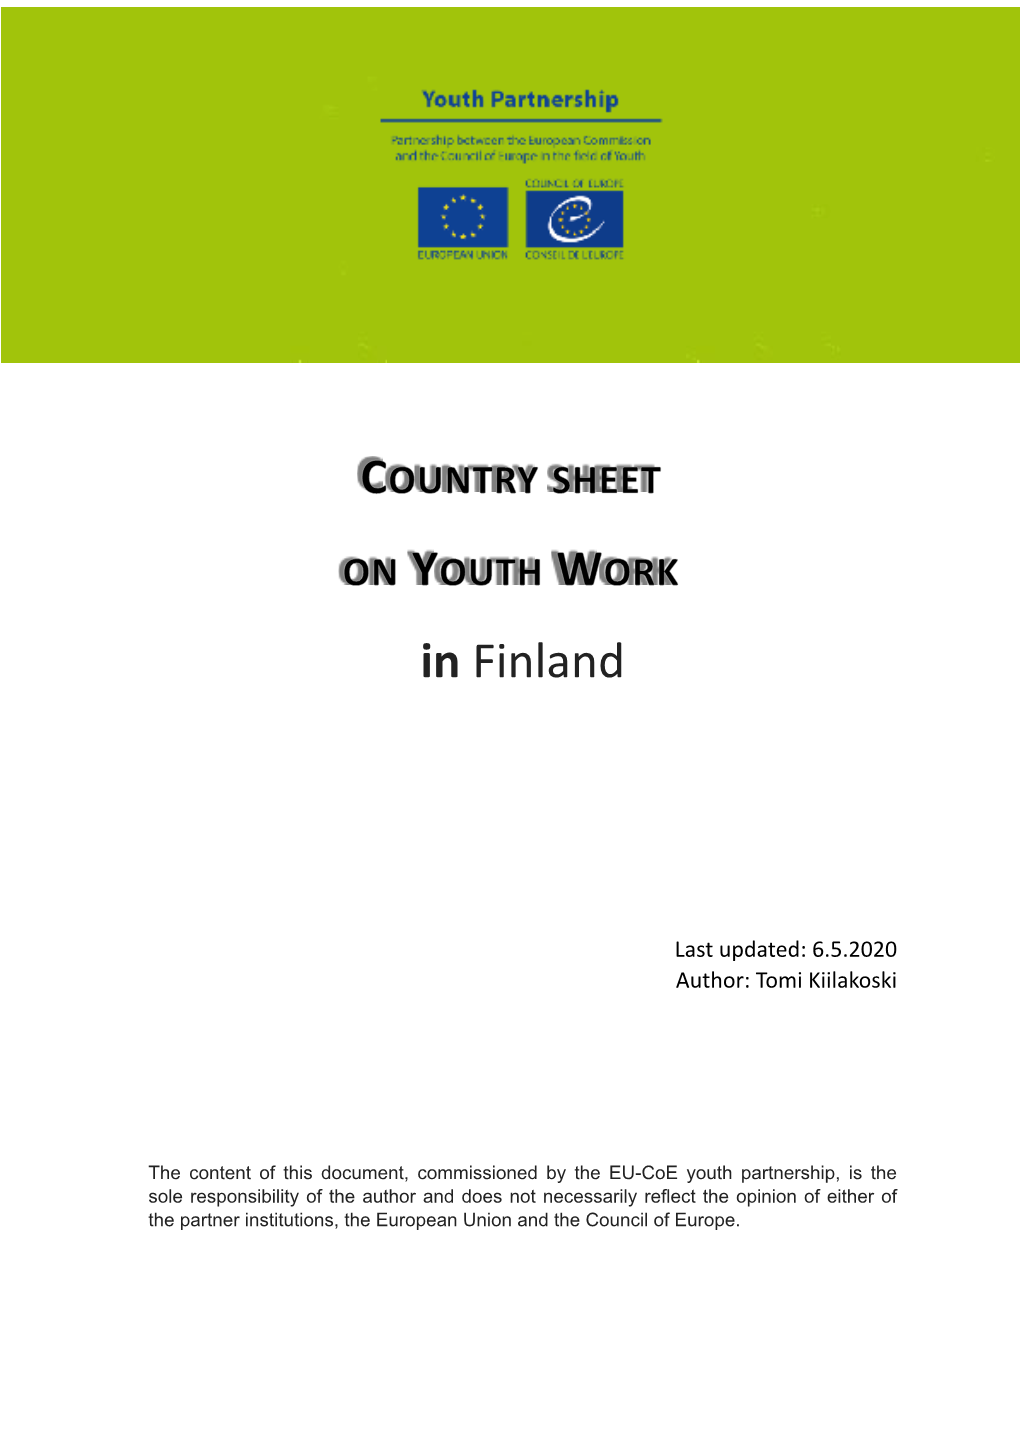 Country Sheet on Youth Work in Finland